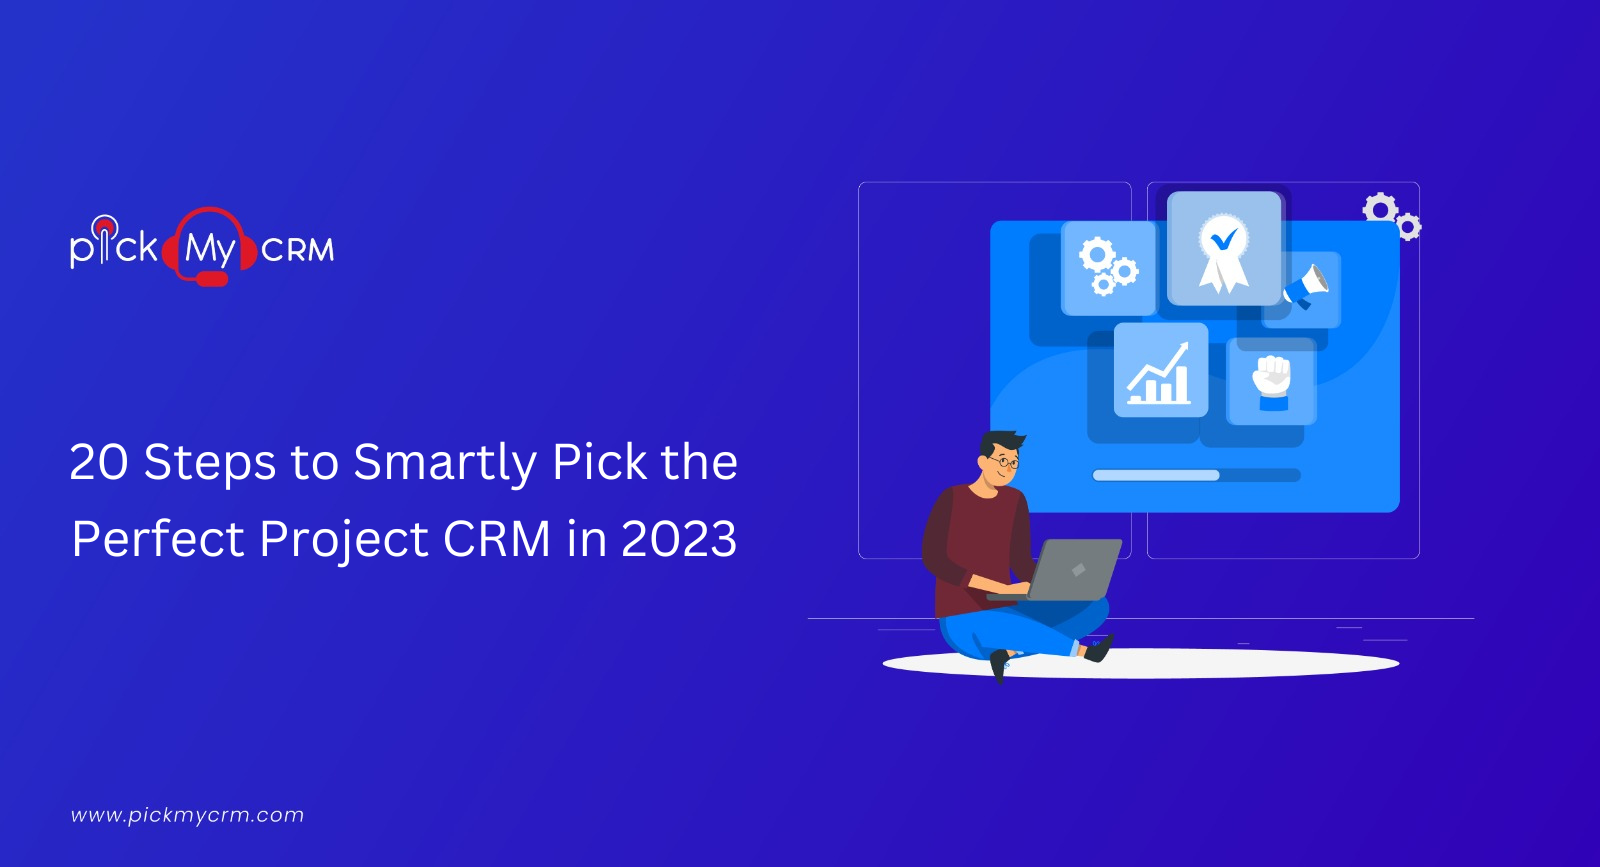 20 Steps to Smartly Pick the Perfect Project CRM in 2023